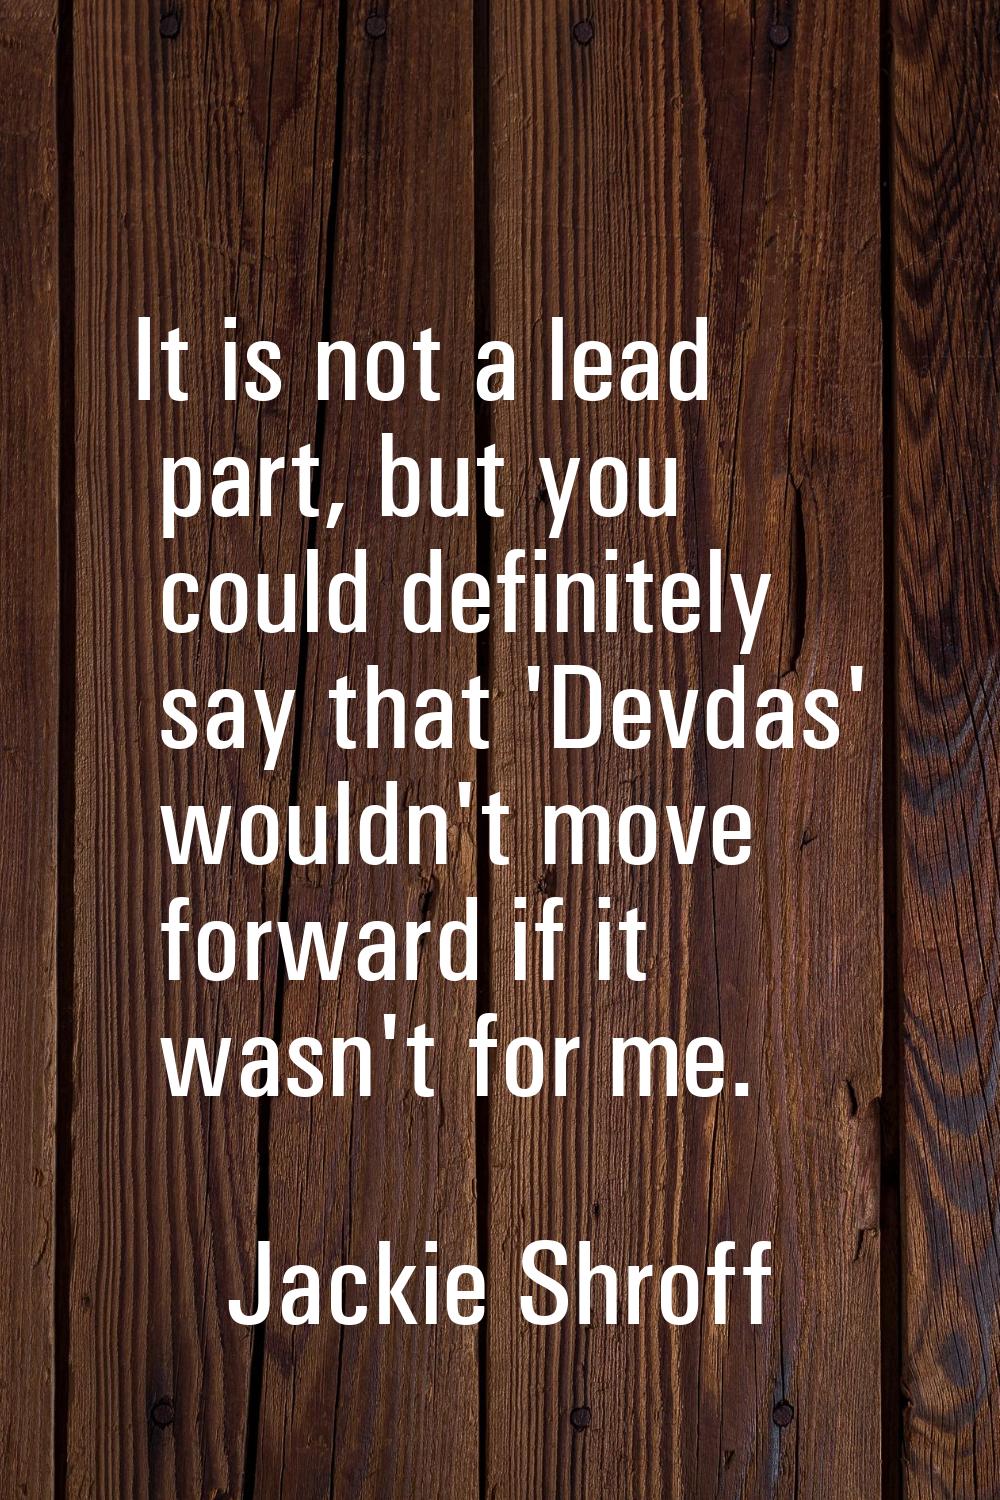 It is not a lead part, but you could definitely say that 'Devdas' wouldn't move forward if it wasn'